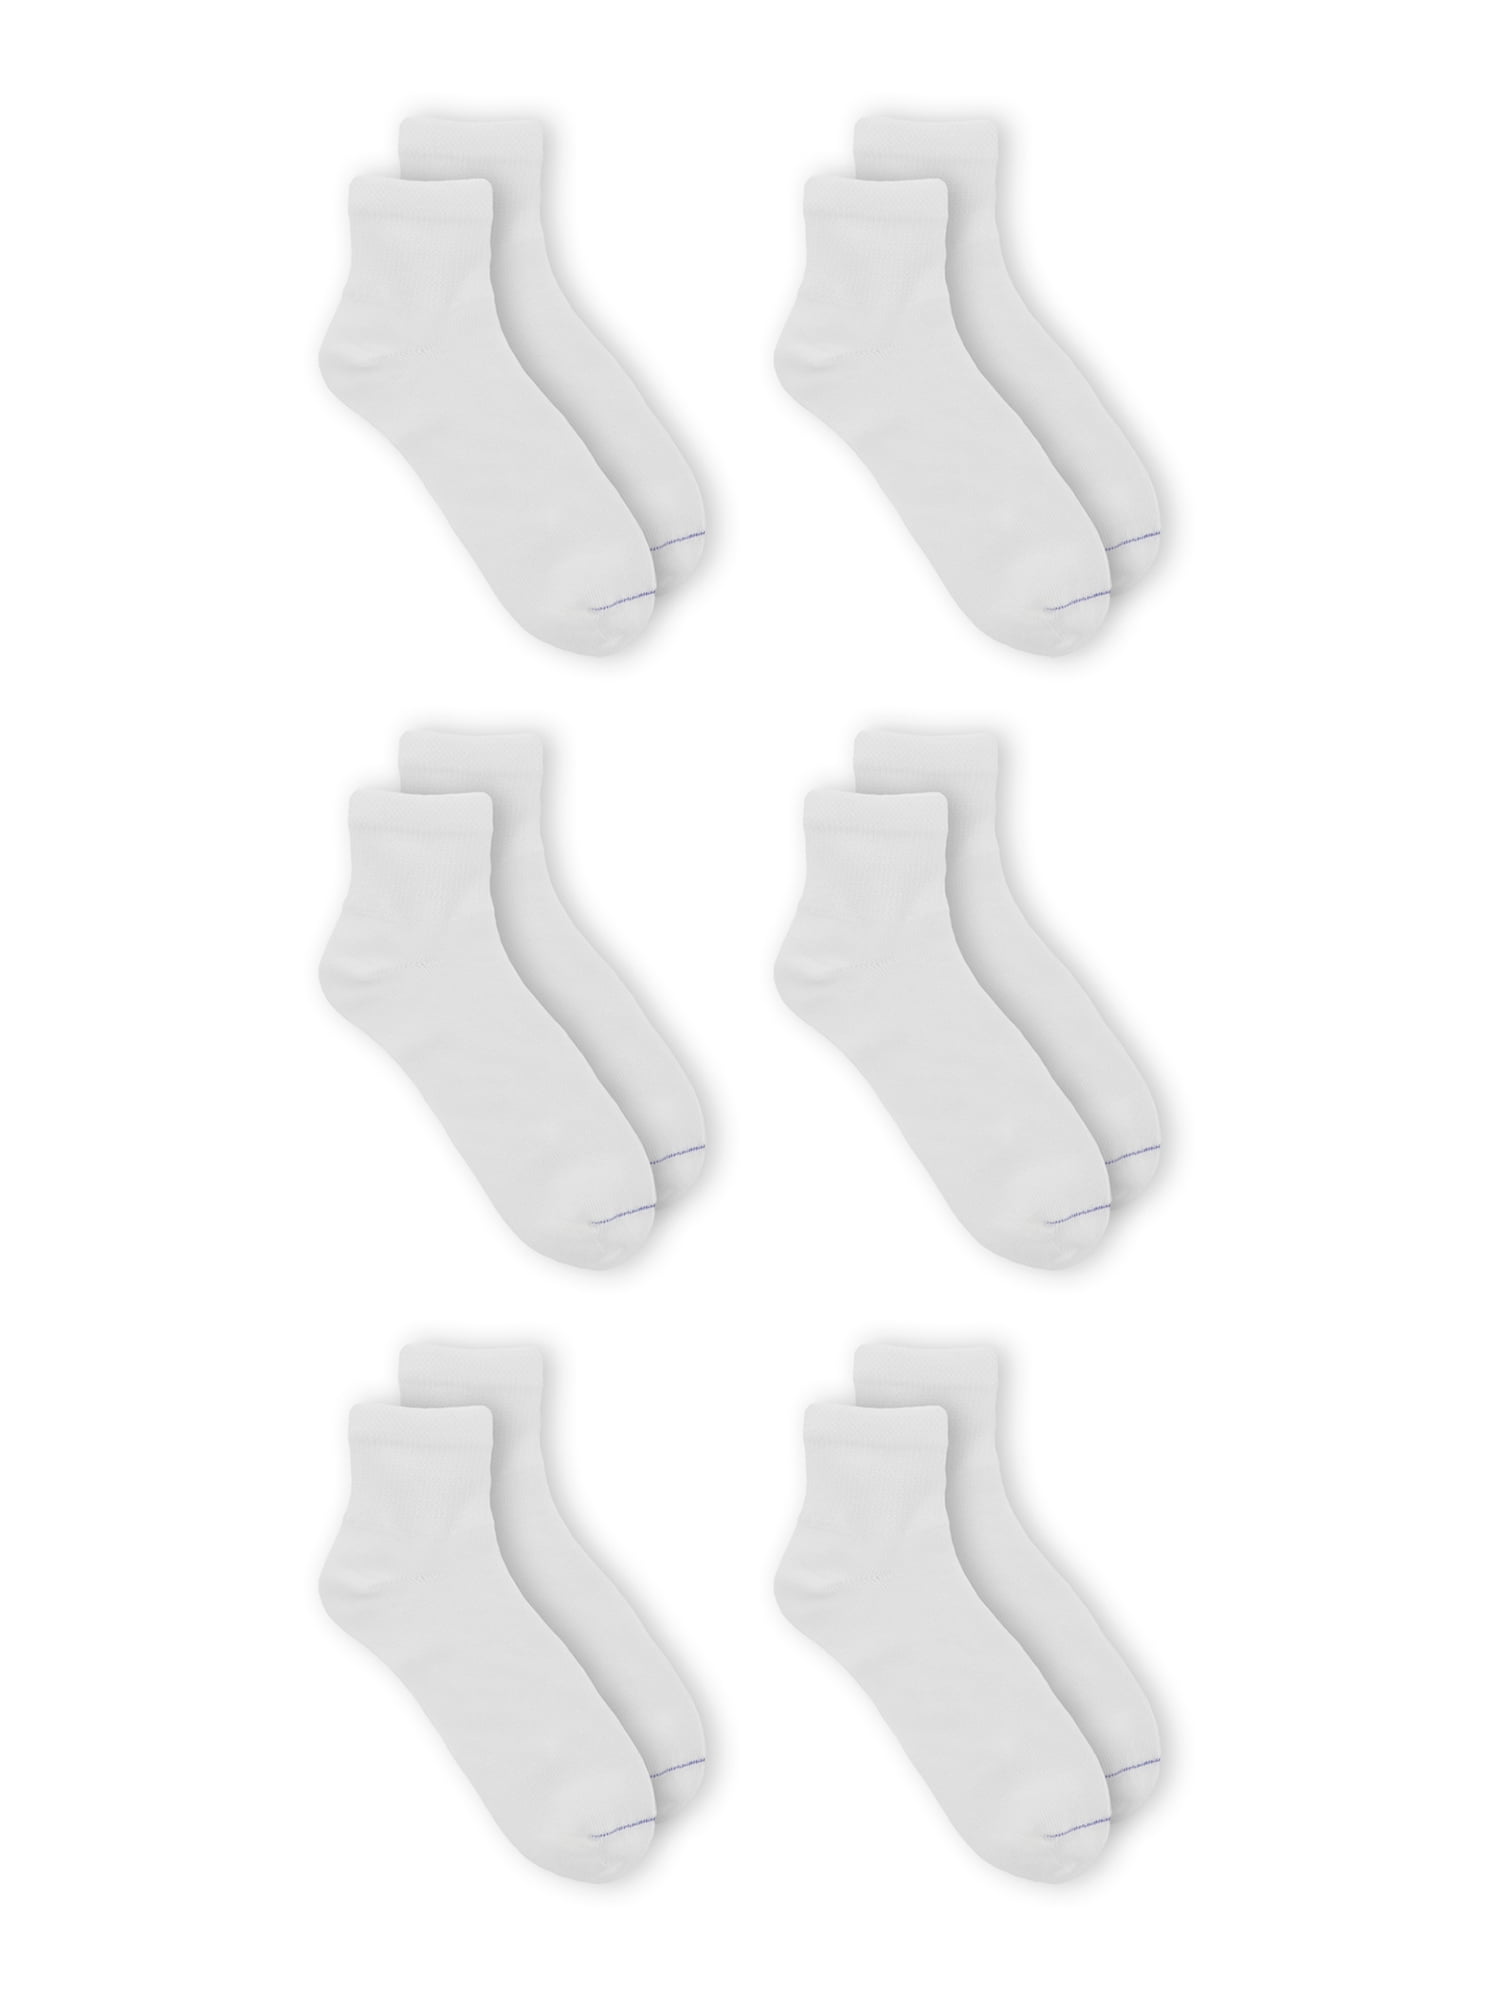 Dr. Scholl's Women's Diabetes and Circulatory Ankle Socks, 6 Pack ...